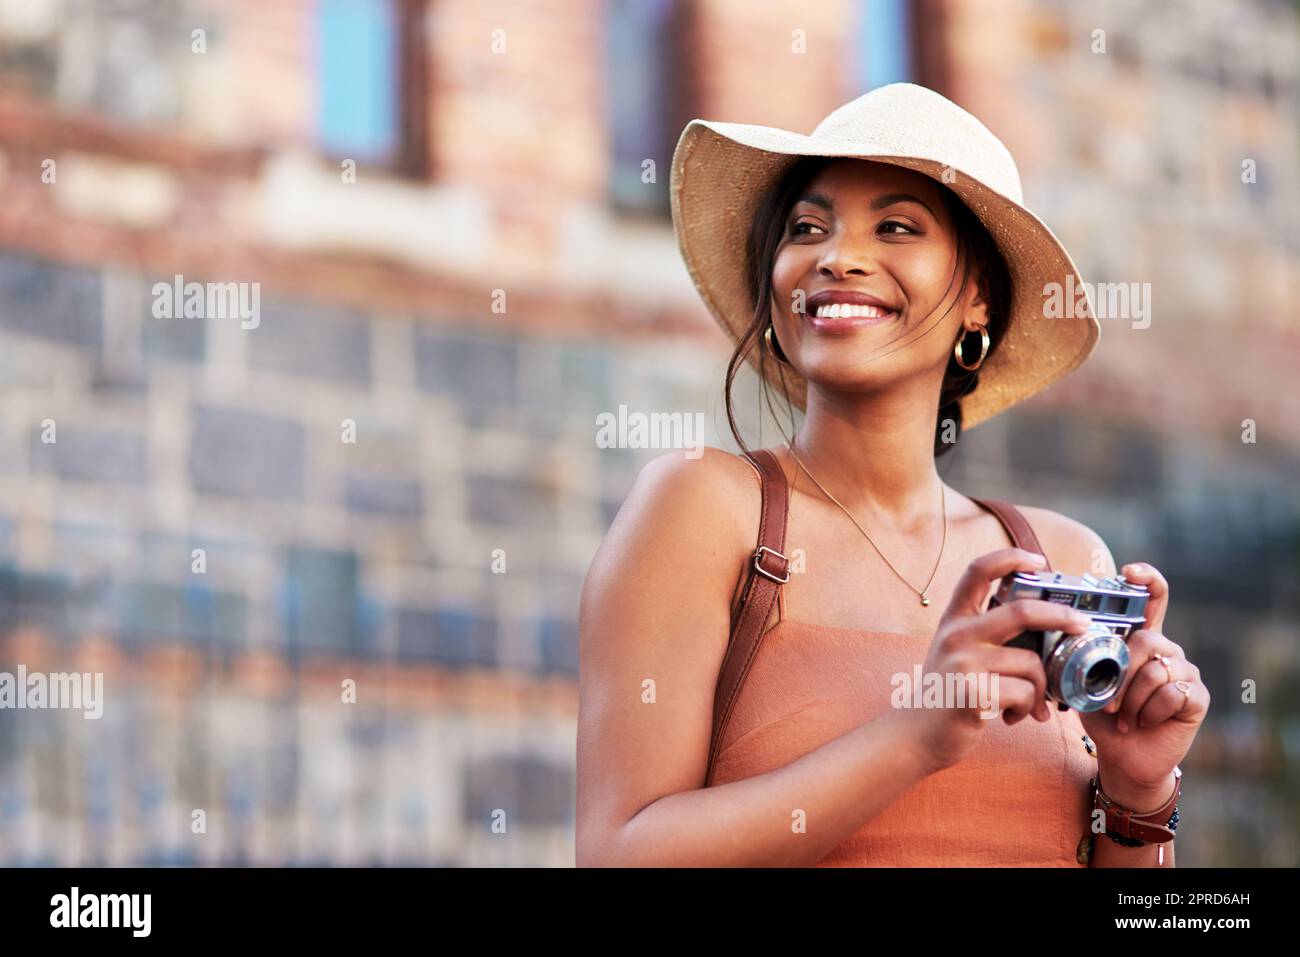 These pictures will always remind me of this wonderful city. an attractive young woman taking pictures with a camera while exploring in a foreign city. Stock Photo